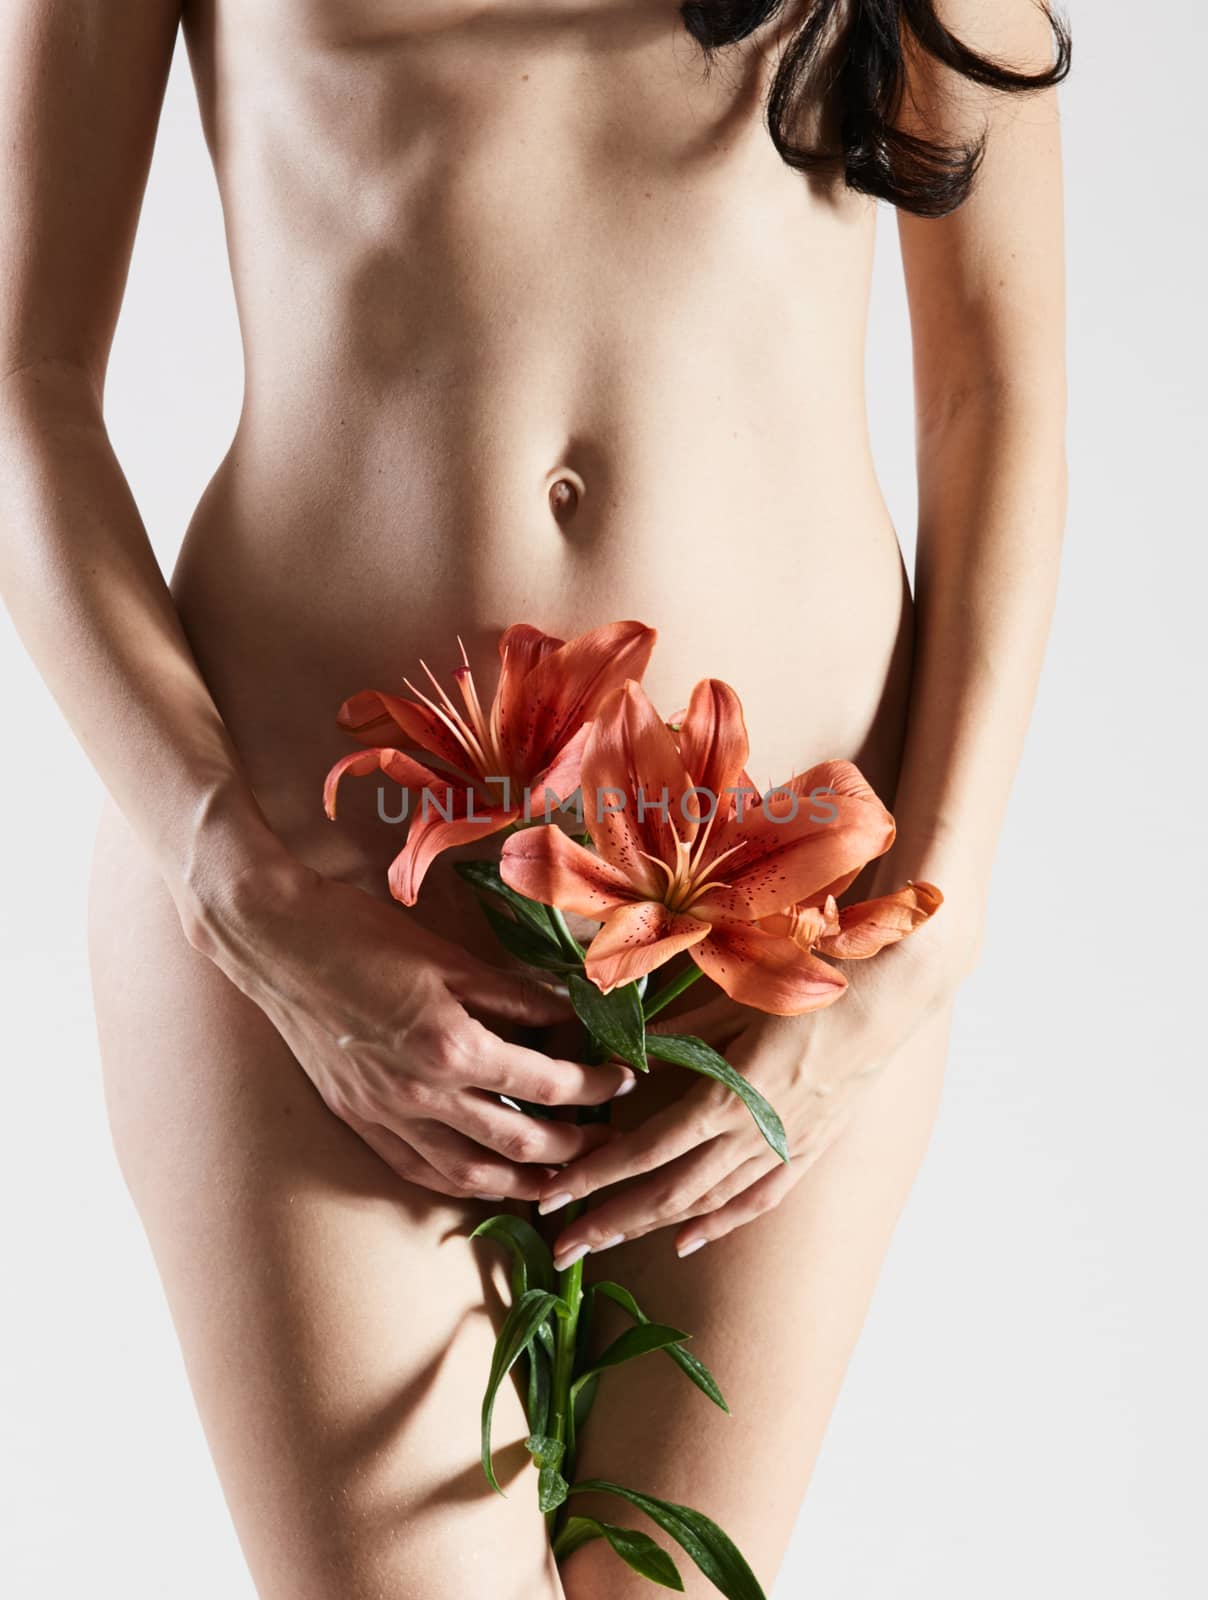 Intimate part of a woman's body with flower in hands. Close up of a woman body with flower on her pubes. No retouch